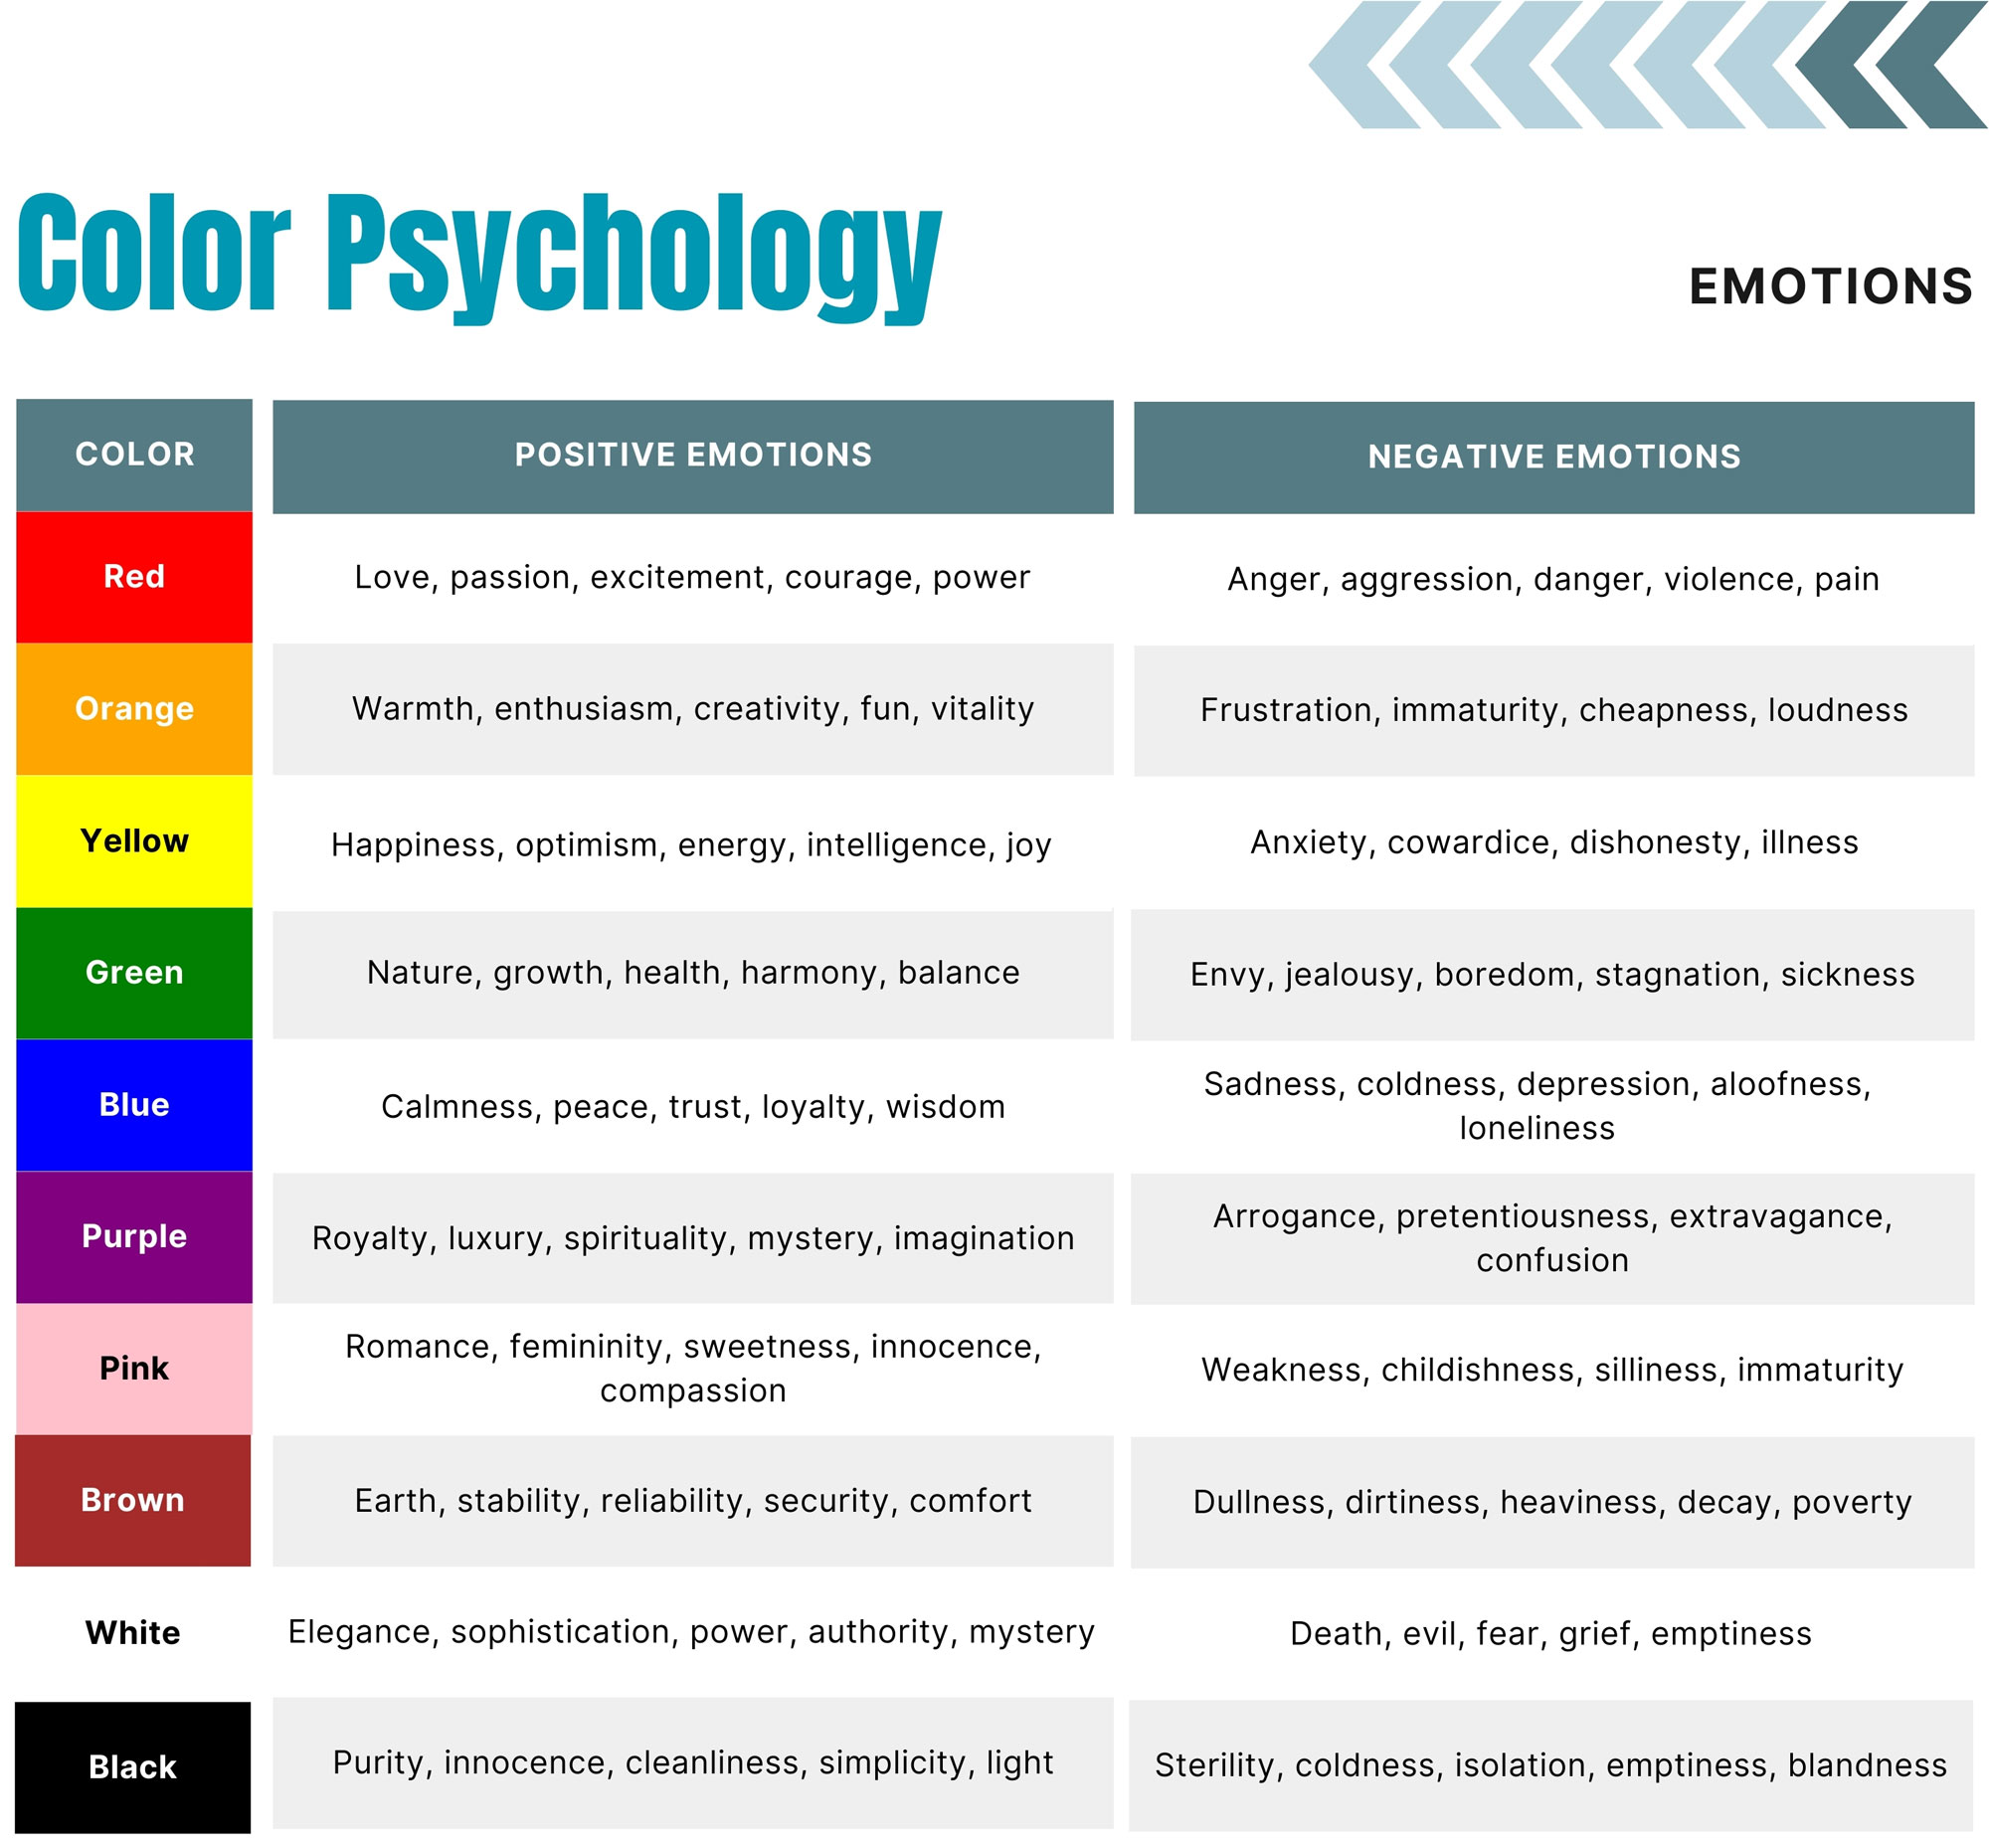 Infographic on Color Psychology outlining various colors with associated positive and negative emotions.